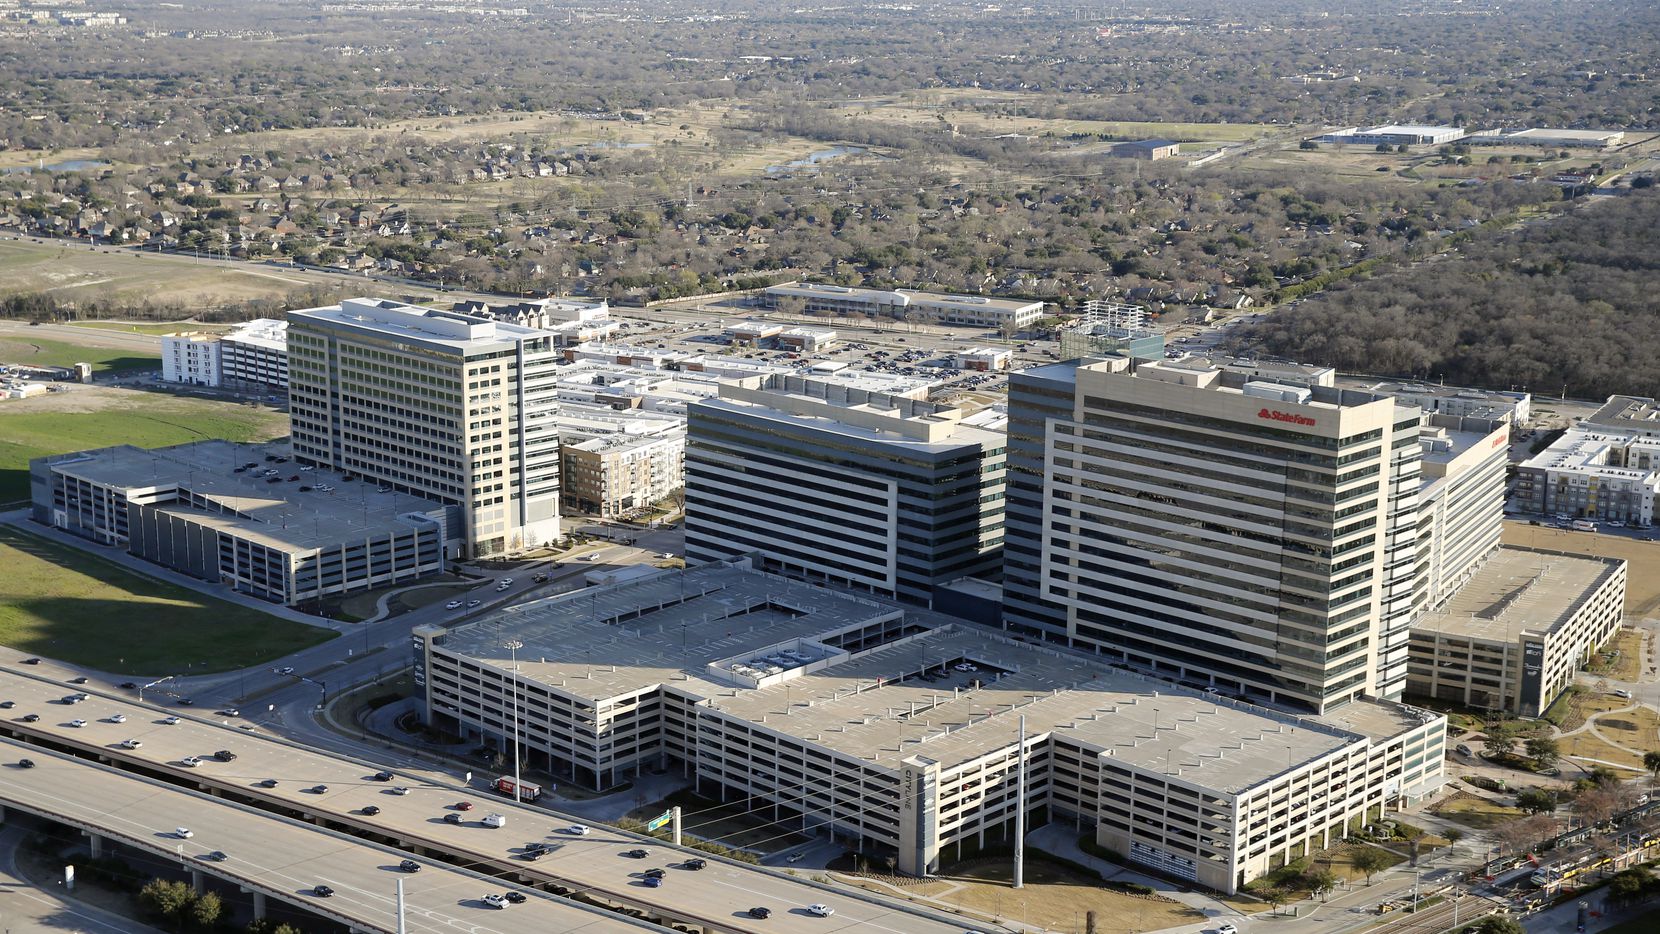 Richardson's huge CityLine complex is one of the largest mixed-use developments in North Texas.